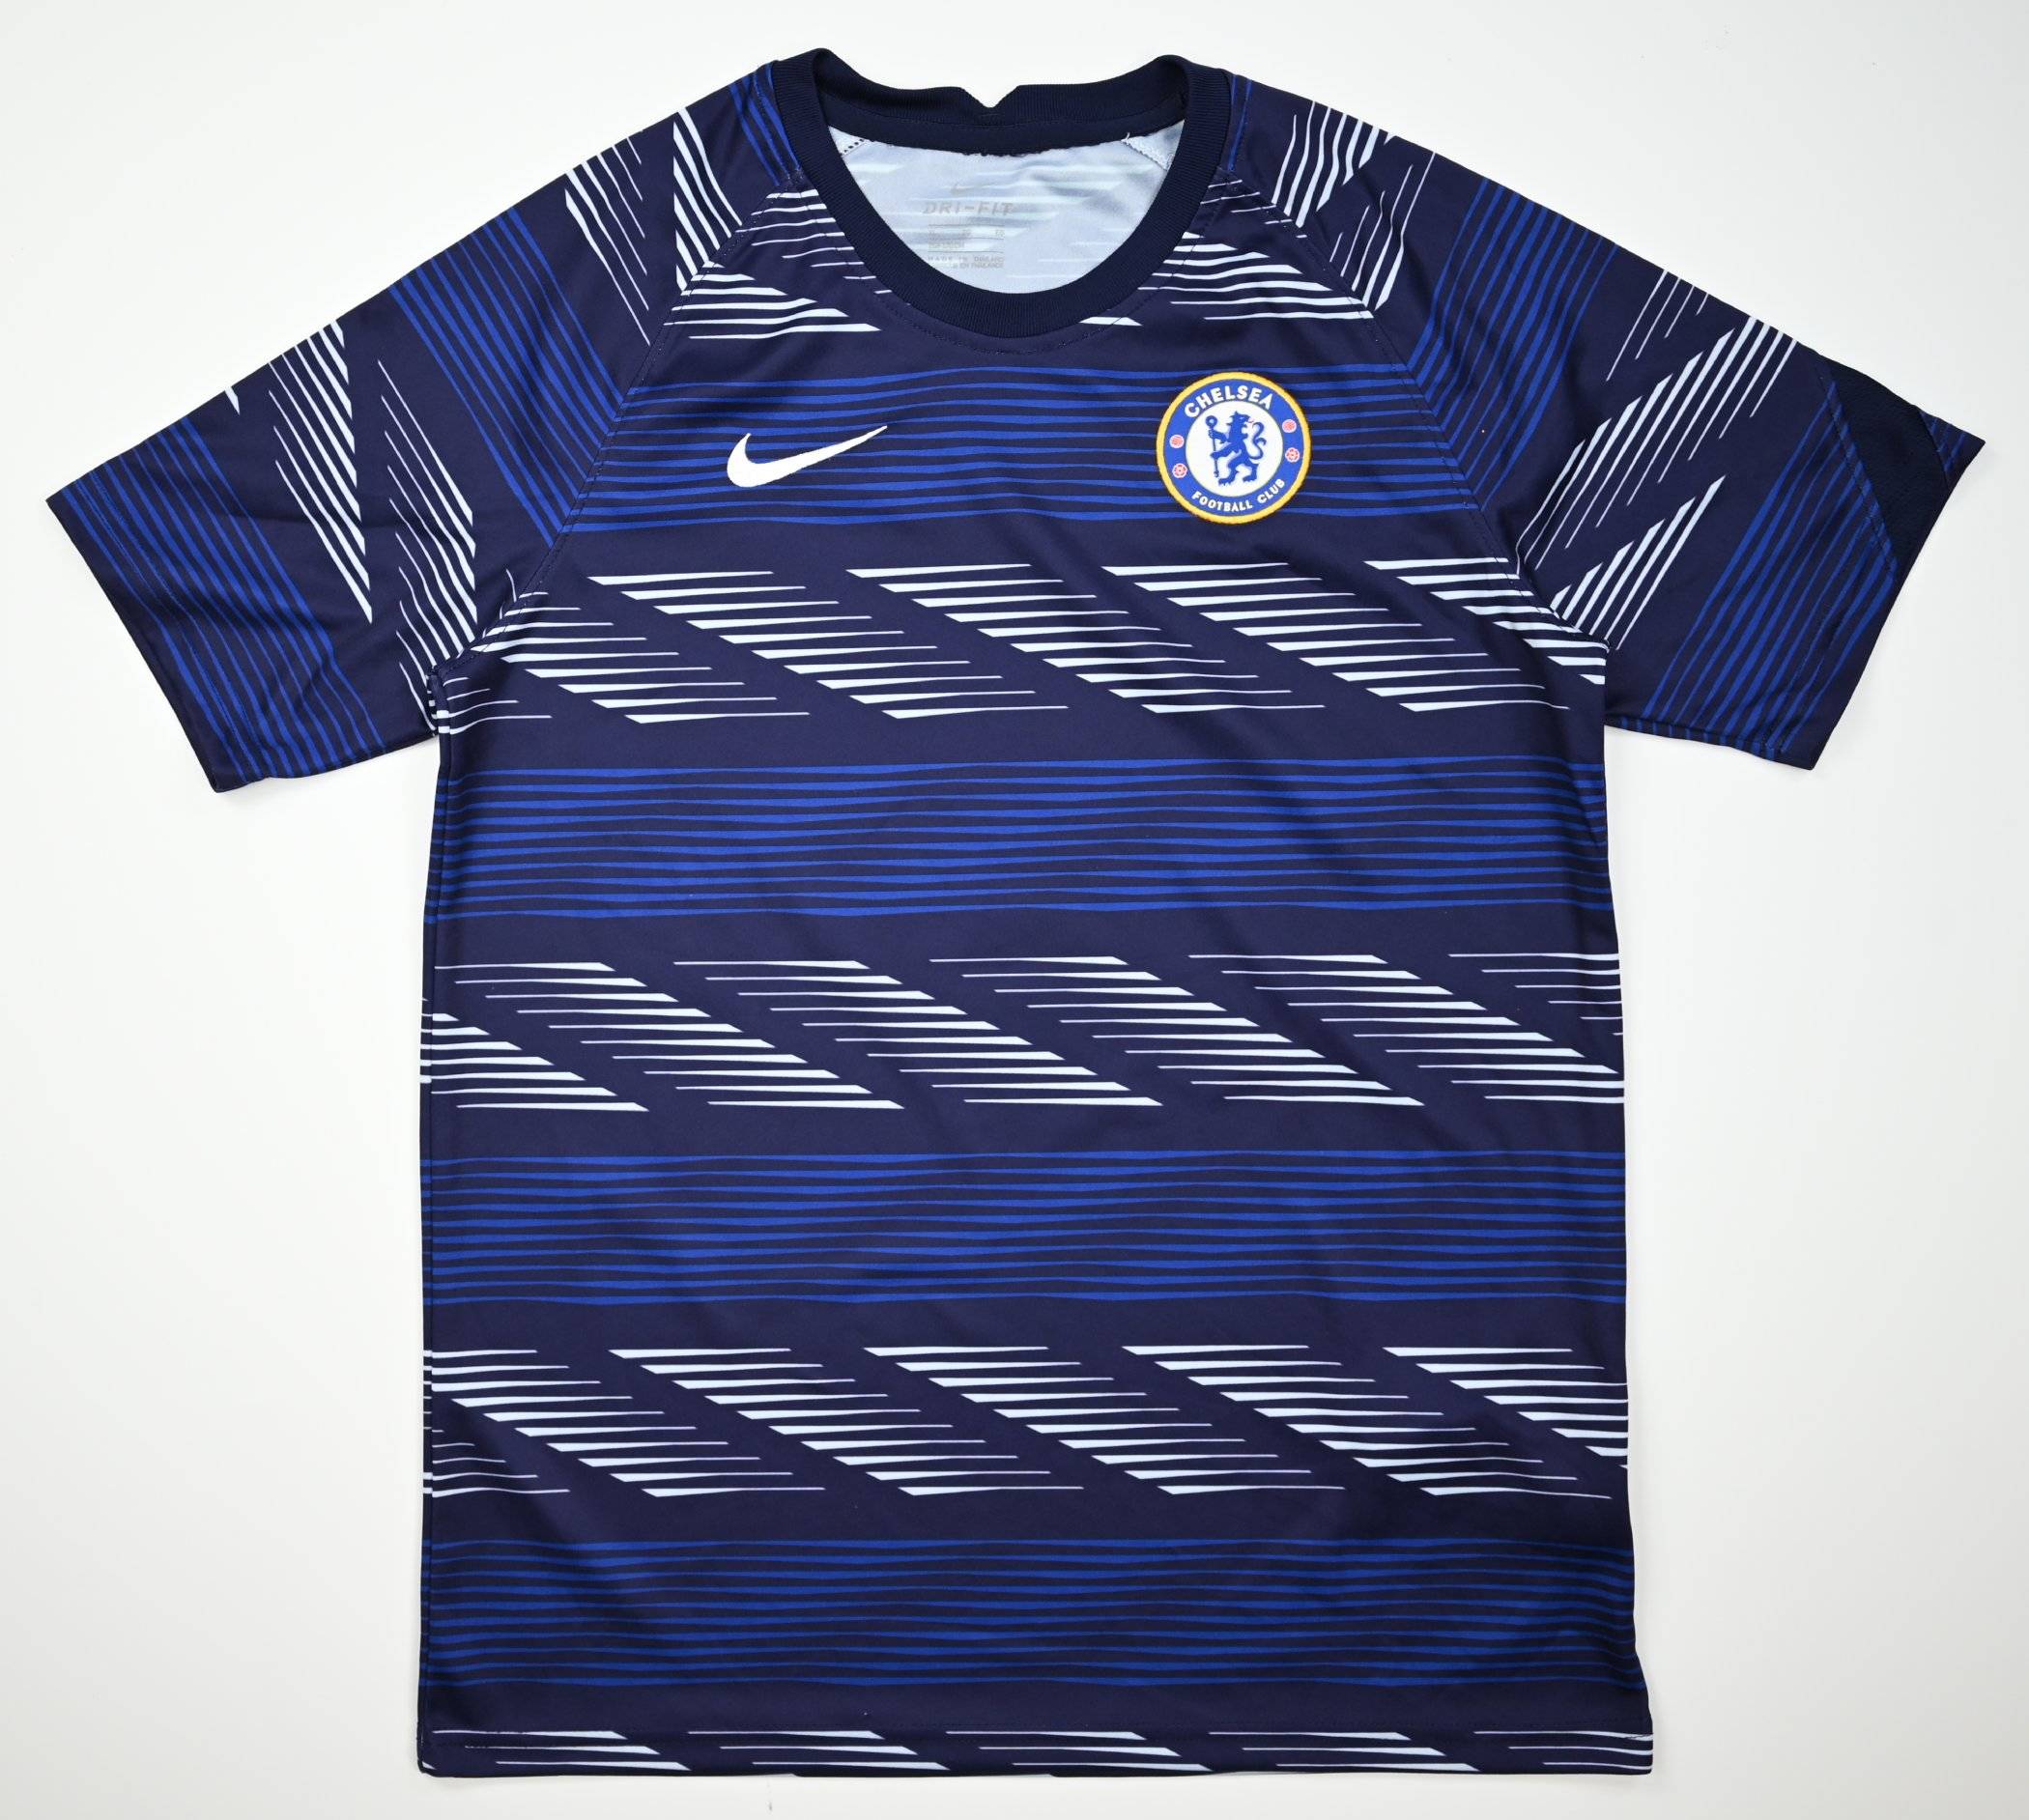 Chelsea Youth Dri-FIT Training Top